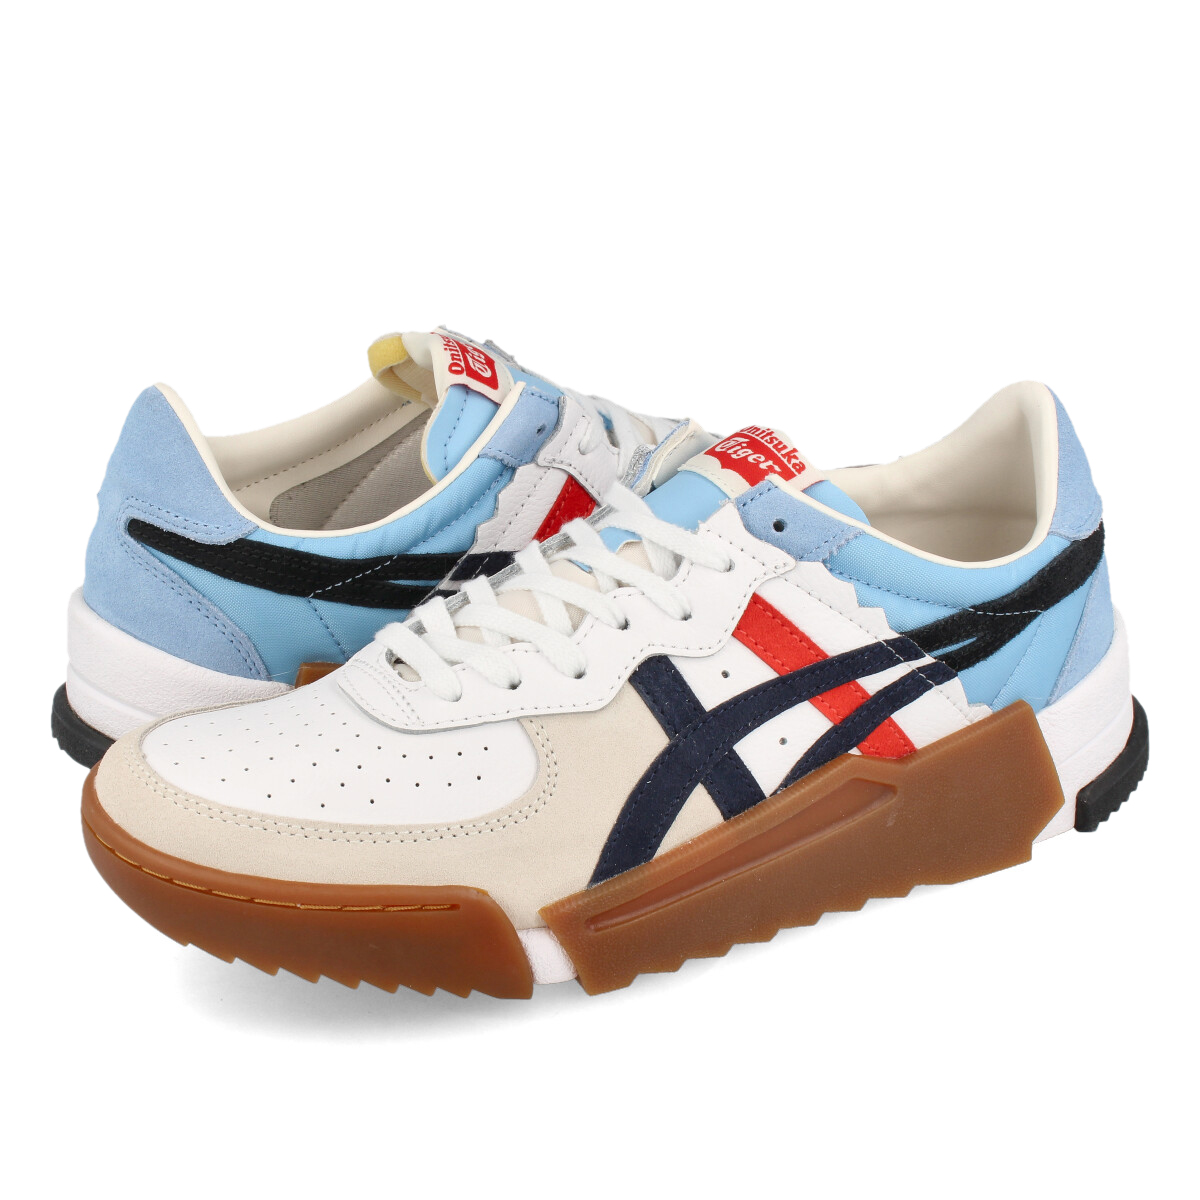 Onitsuka Tiger D-TRAINER GC オニツカタイガー Dトレーナー GC WHITE/MIDNIGHT 1183A800-100  | SELECT SHOP LOWTEX